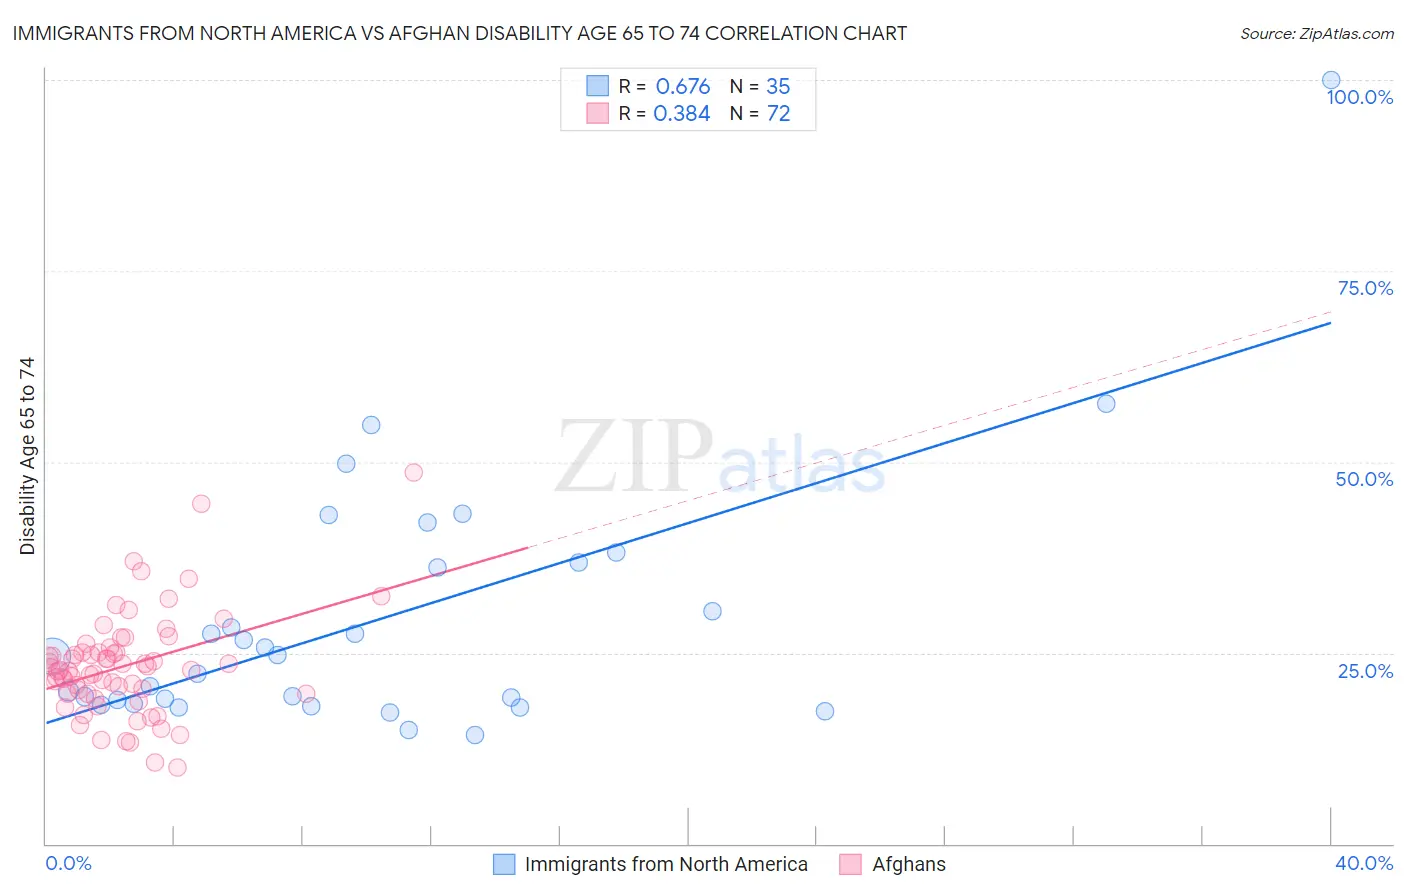 Immigrants from North America vs Afghan Disability Age 65 to 74